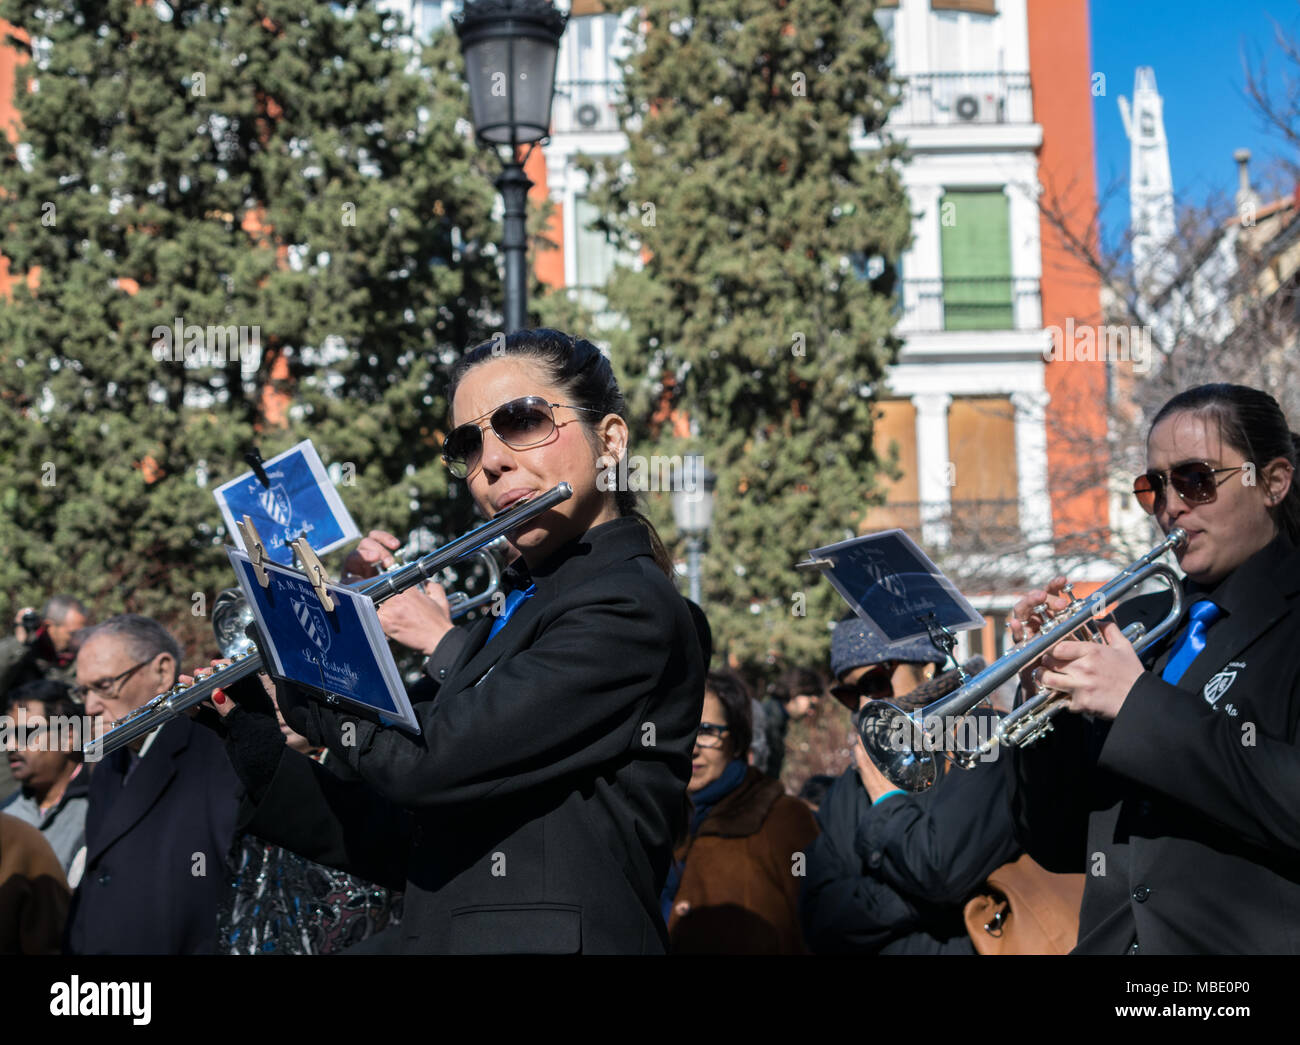 Flautist playing as part of a marching band in an Easter parade, Semana Santa (Holy Week) parades, Madrid, Spain, 2018 Stock Photo